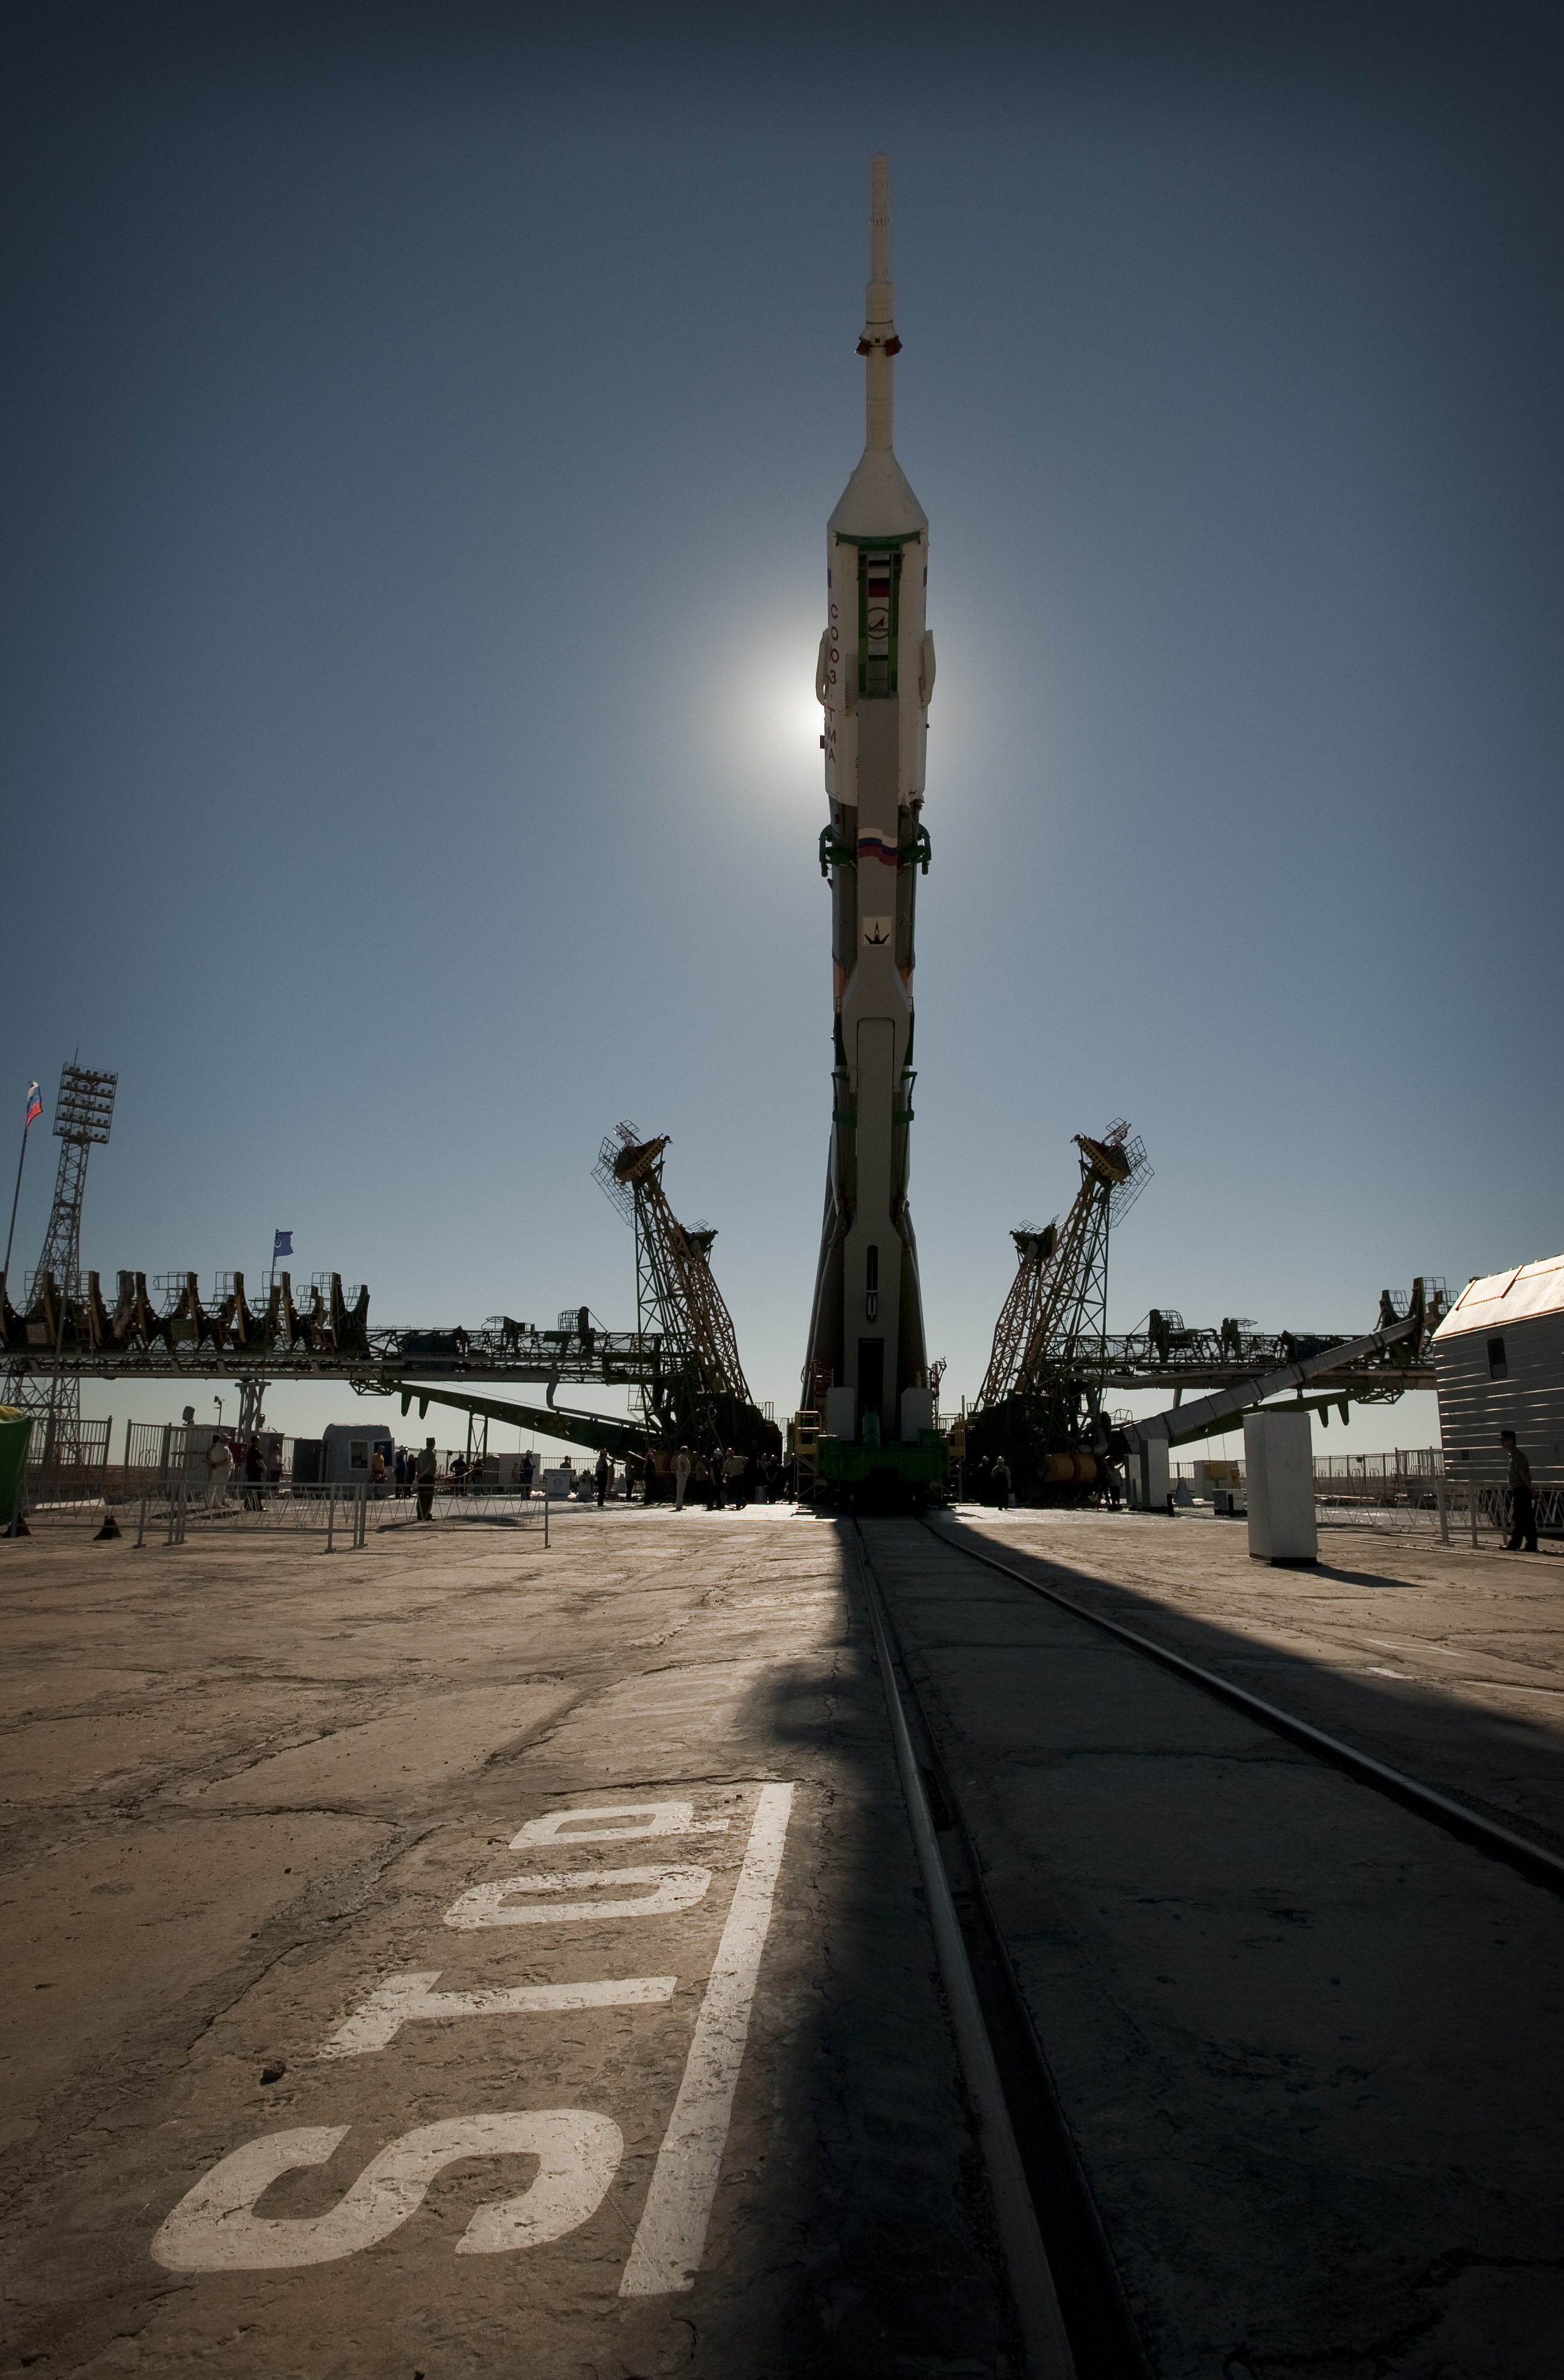  The Soyuz TMA-19 spacecraft is raised into vertical position at the launch pad of the Baikonur Cosmodrome in Kazakhstan, Sunday, June 13, 2010. The launch of the Soyuz spacecraft with Expedition 24 NASA Flight Engineers Shannon Walker and Doug Wheel